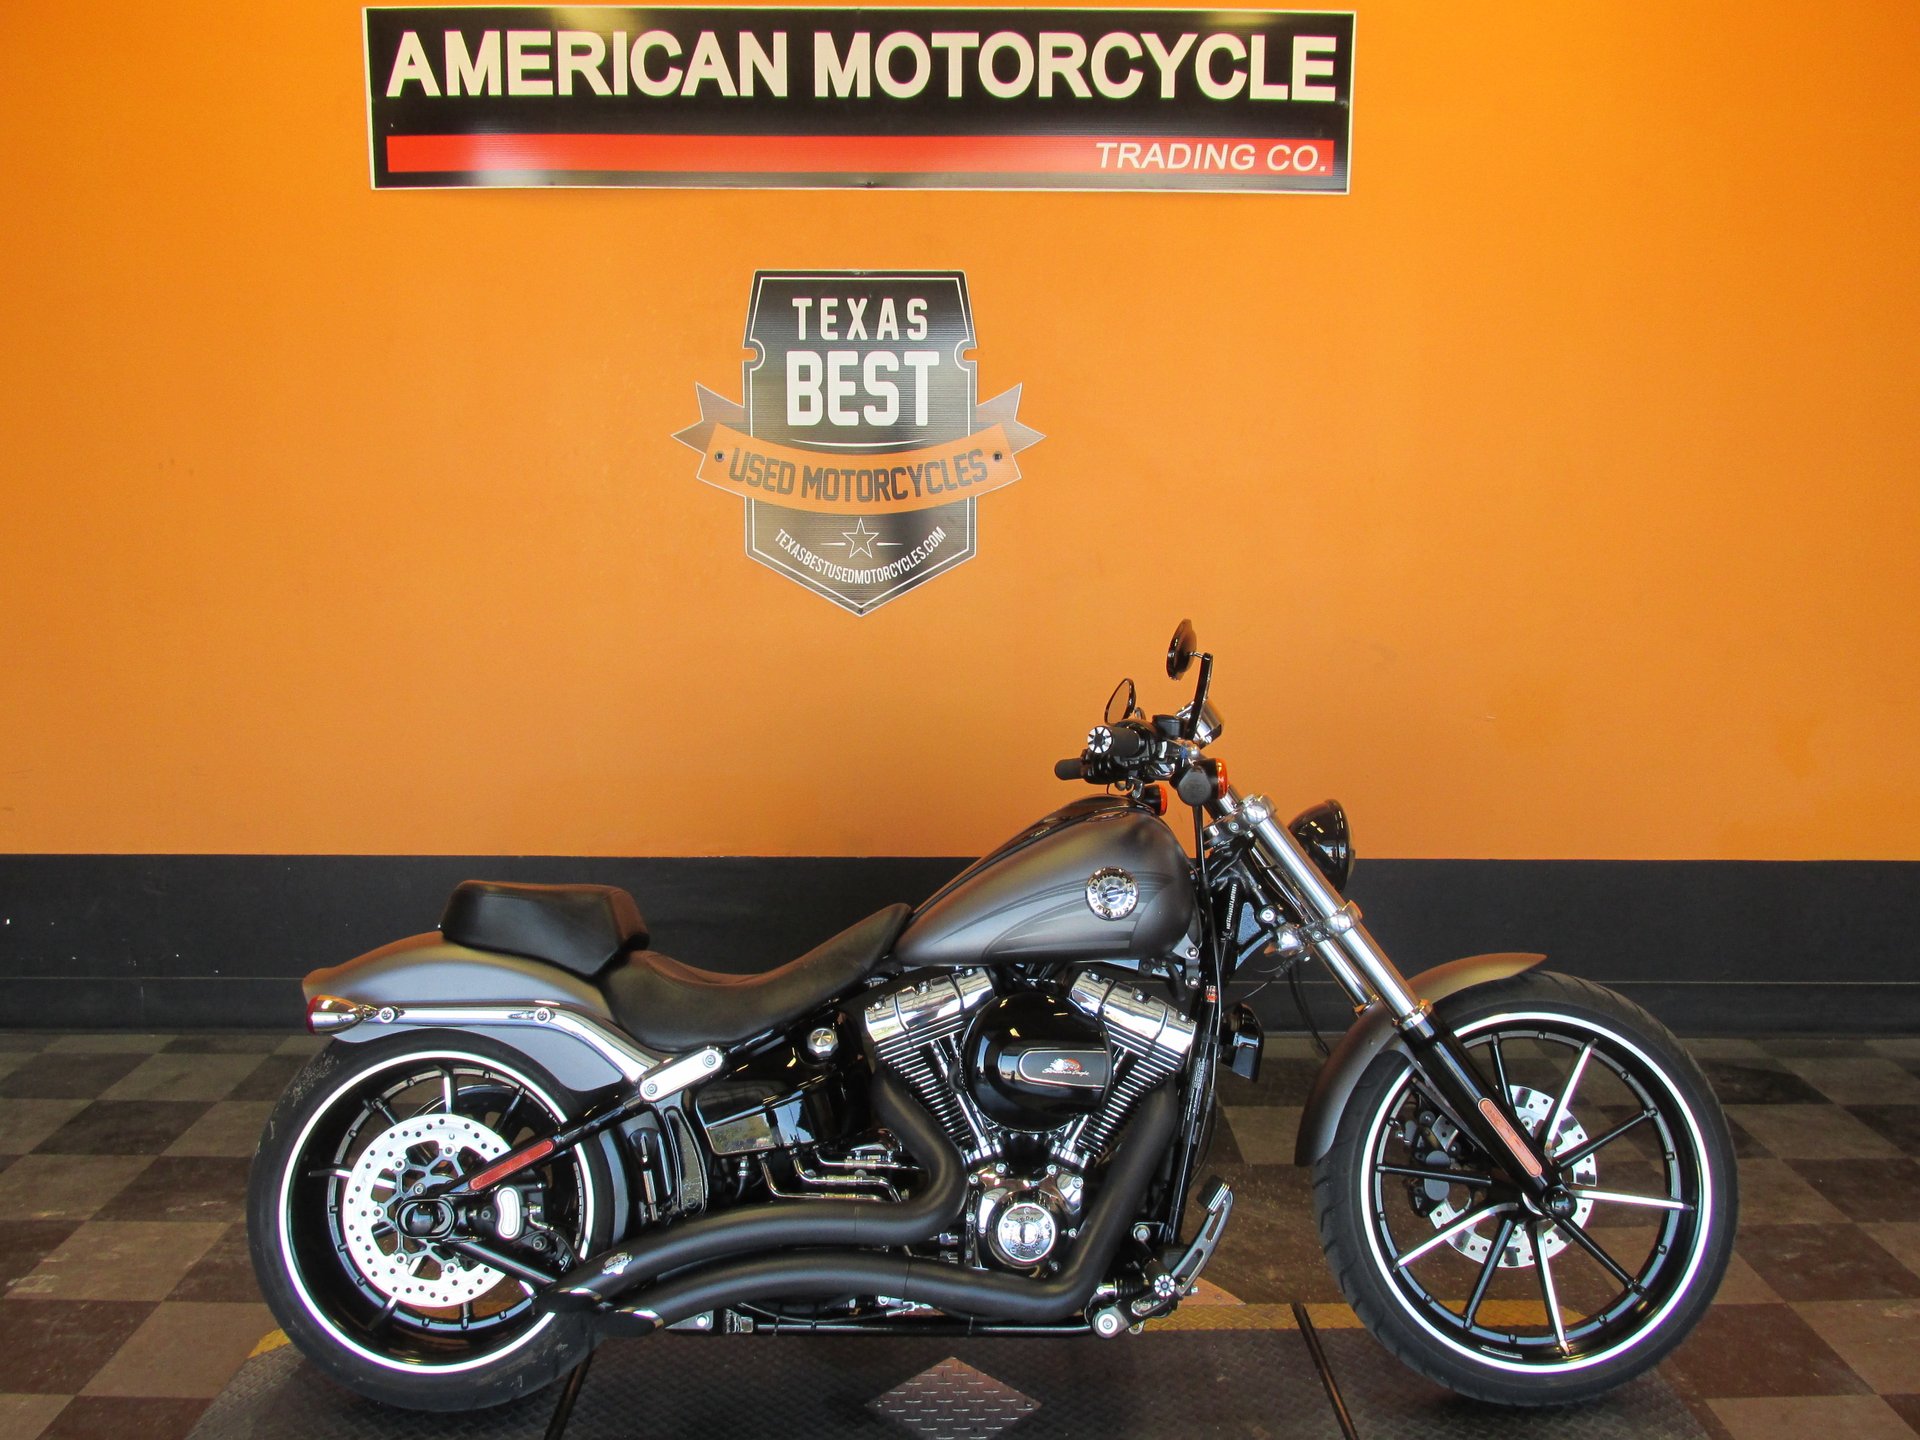 2016 Harley Davidson Softail Breakout American Motorcycle Trading Company Used Harley Davidson Motorcycles